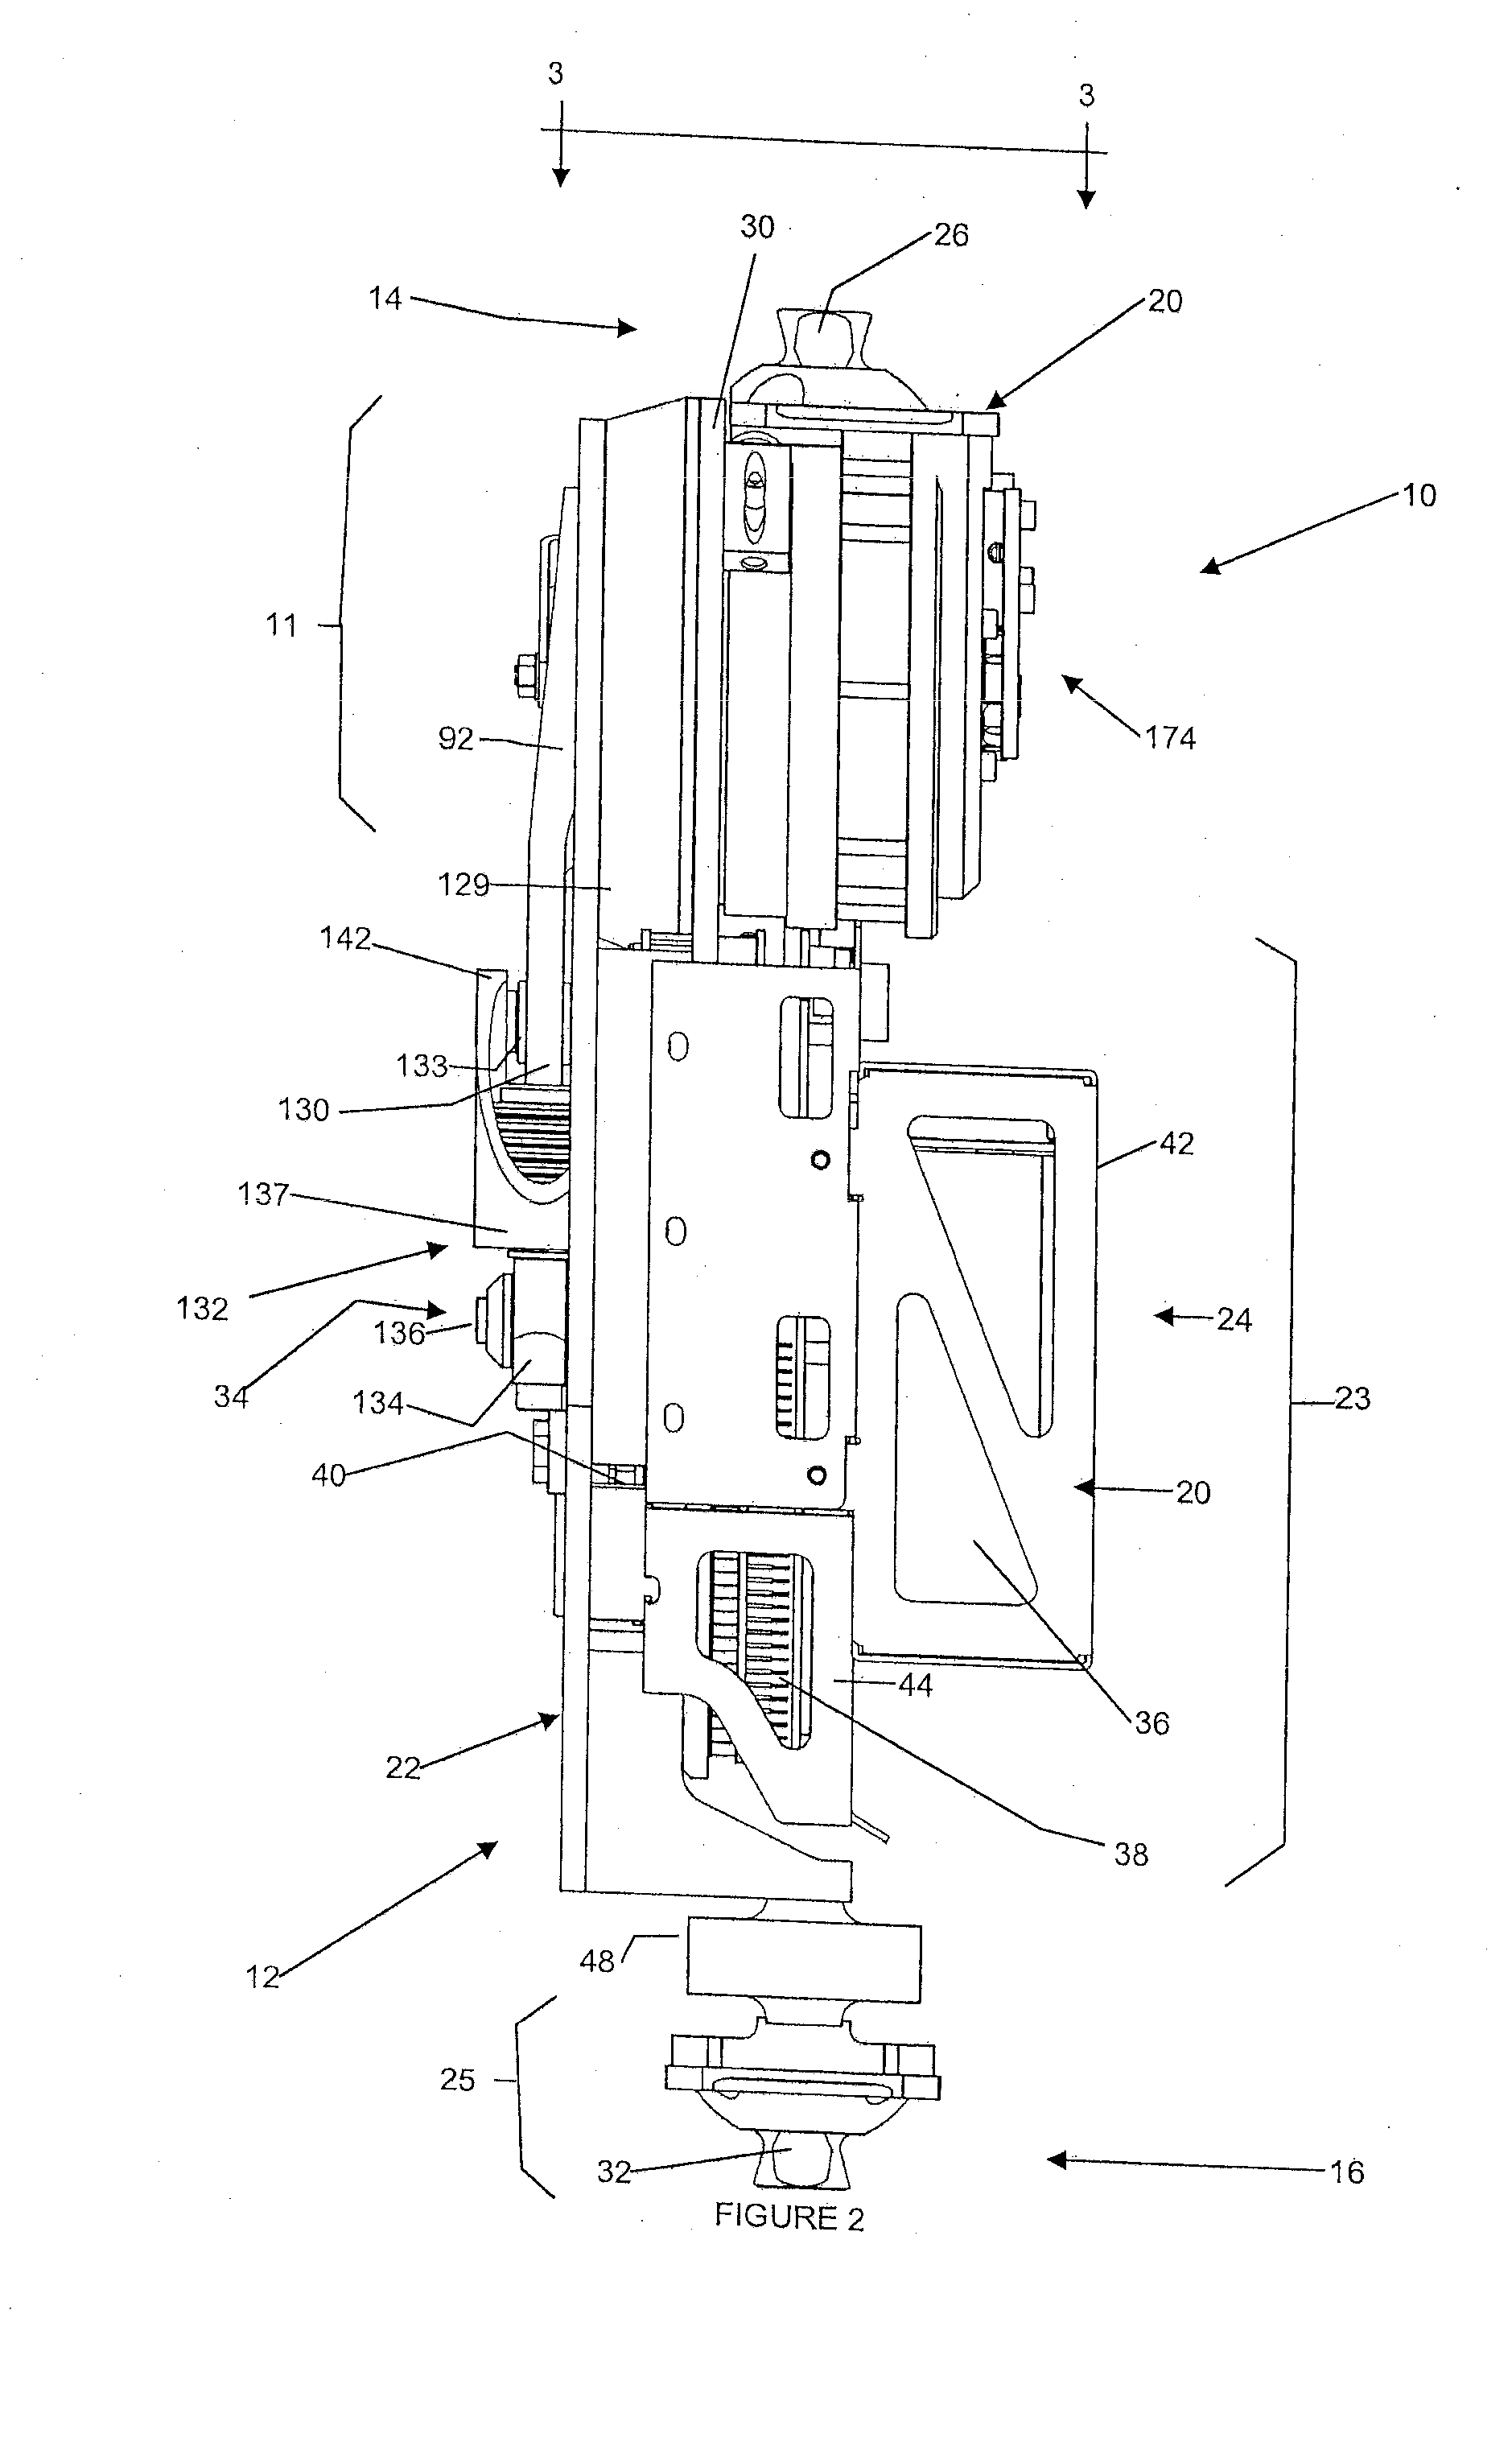 Joint Actuation Mechanism for a Prosthetic and/or Orthotic Device Having a Compliant Transmission